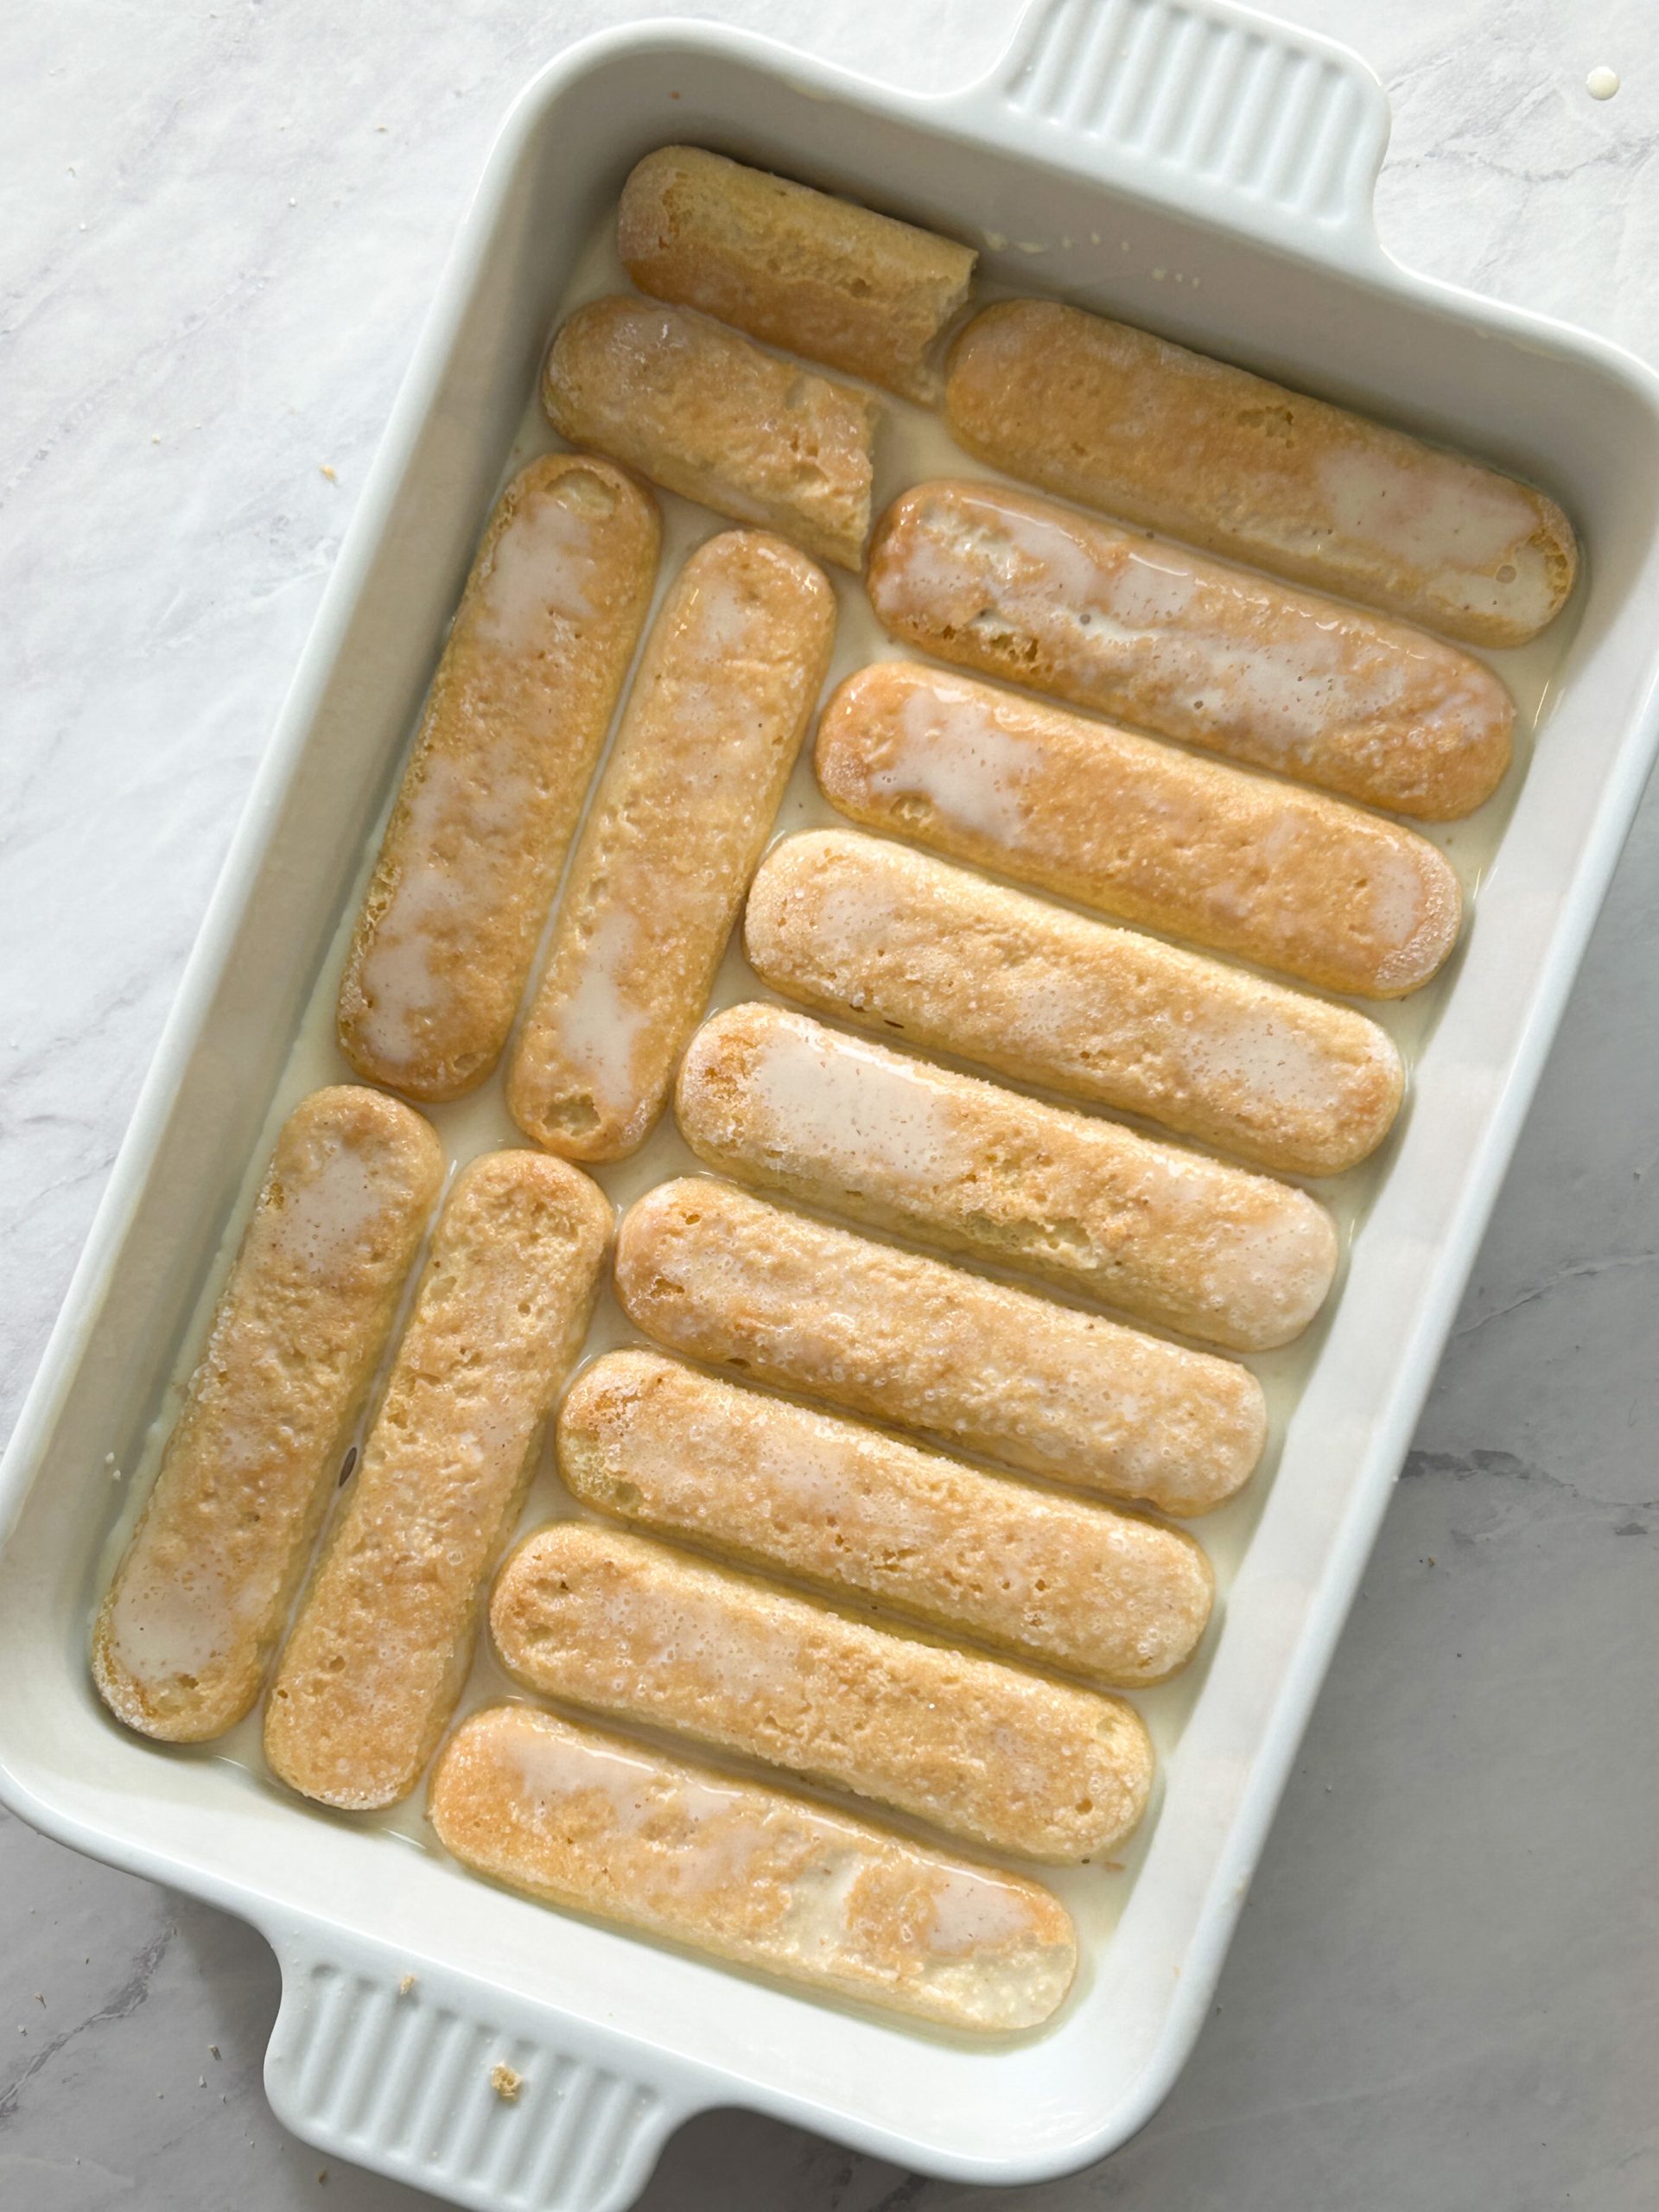 ladyfingers soaked in tres leches milk mixture in a dish